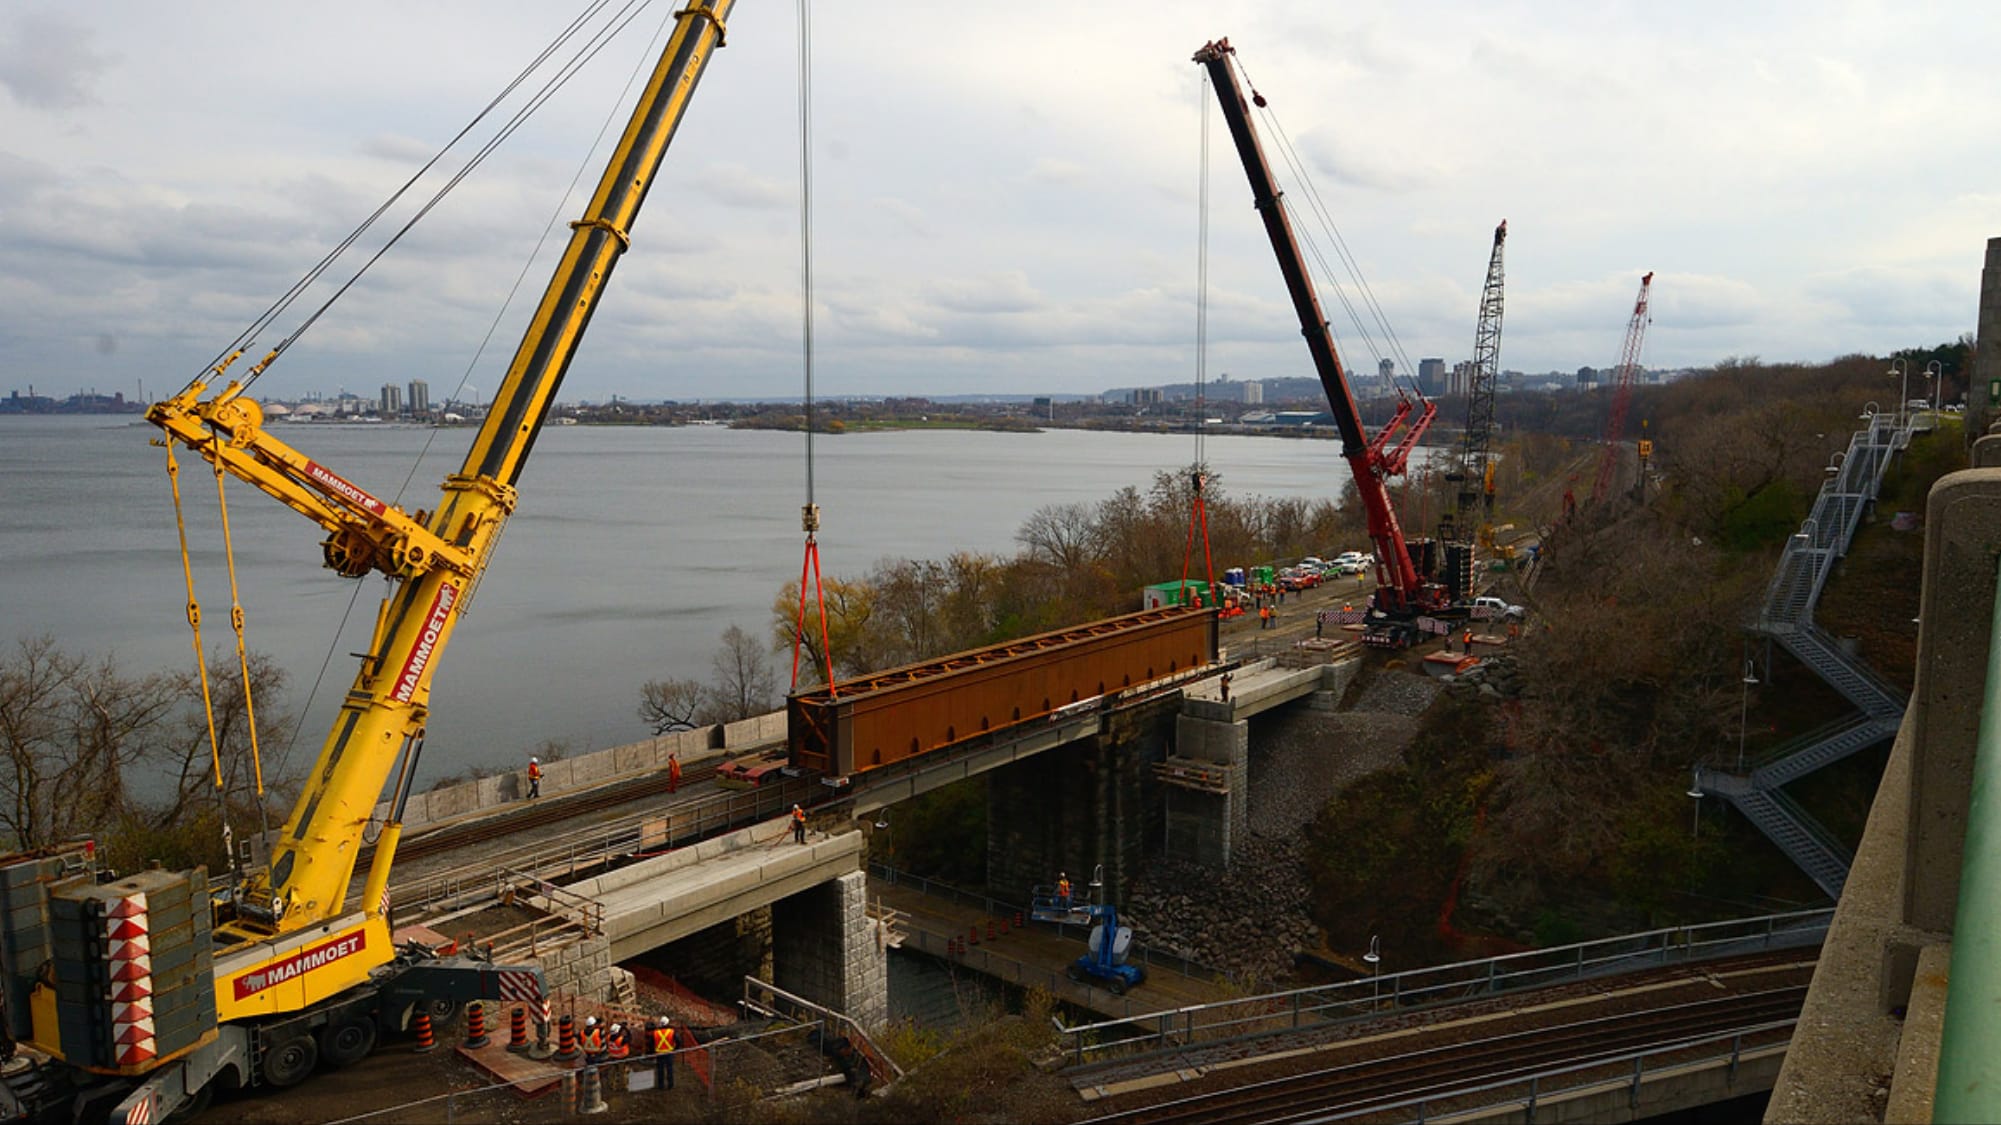 Cranes lift a large piece of steel into place during construction on a rail bridge at the Desjard...